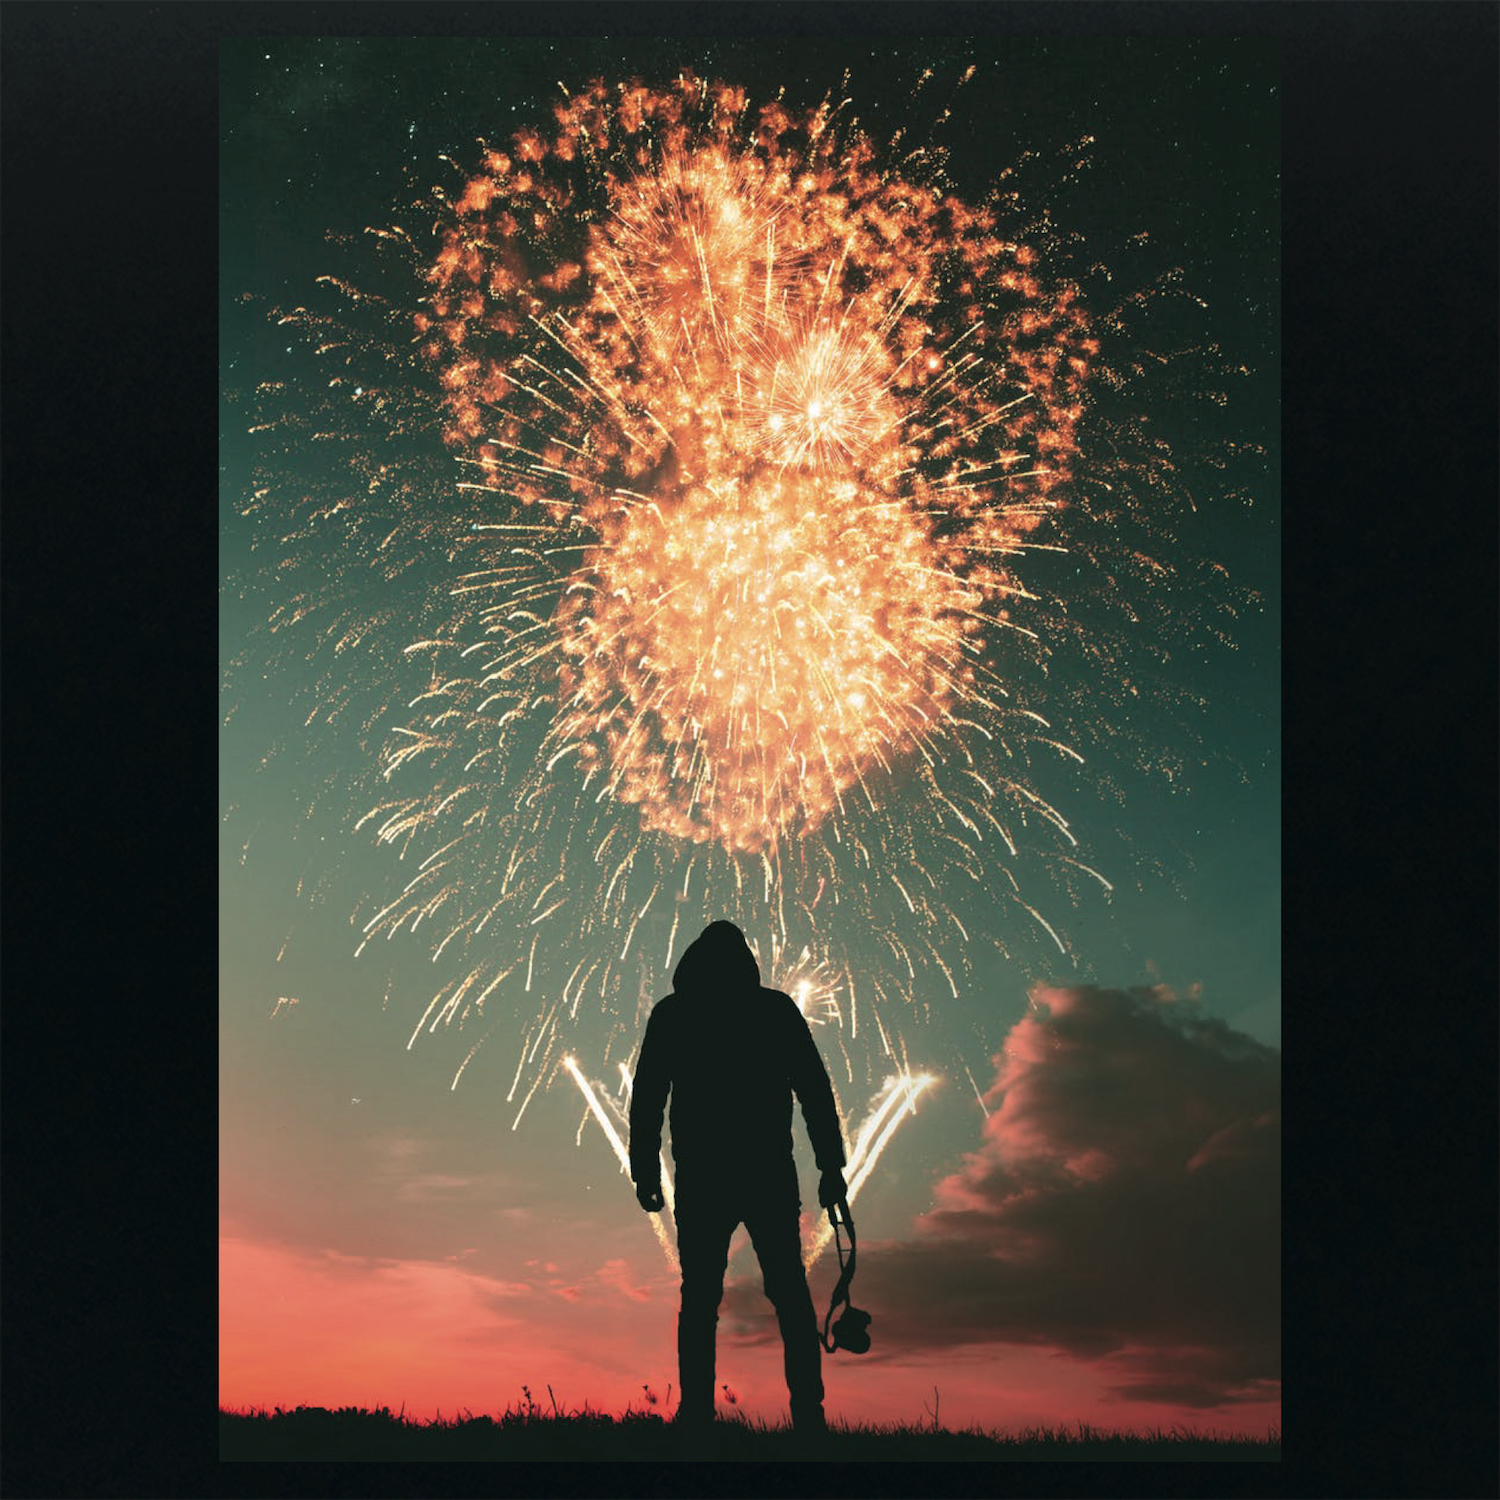 Photographer in front of fireworks - Print on Dibond